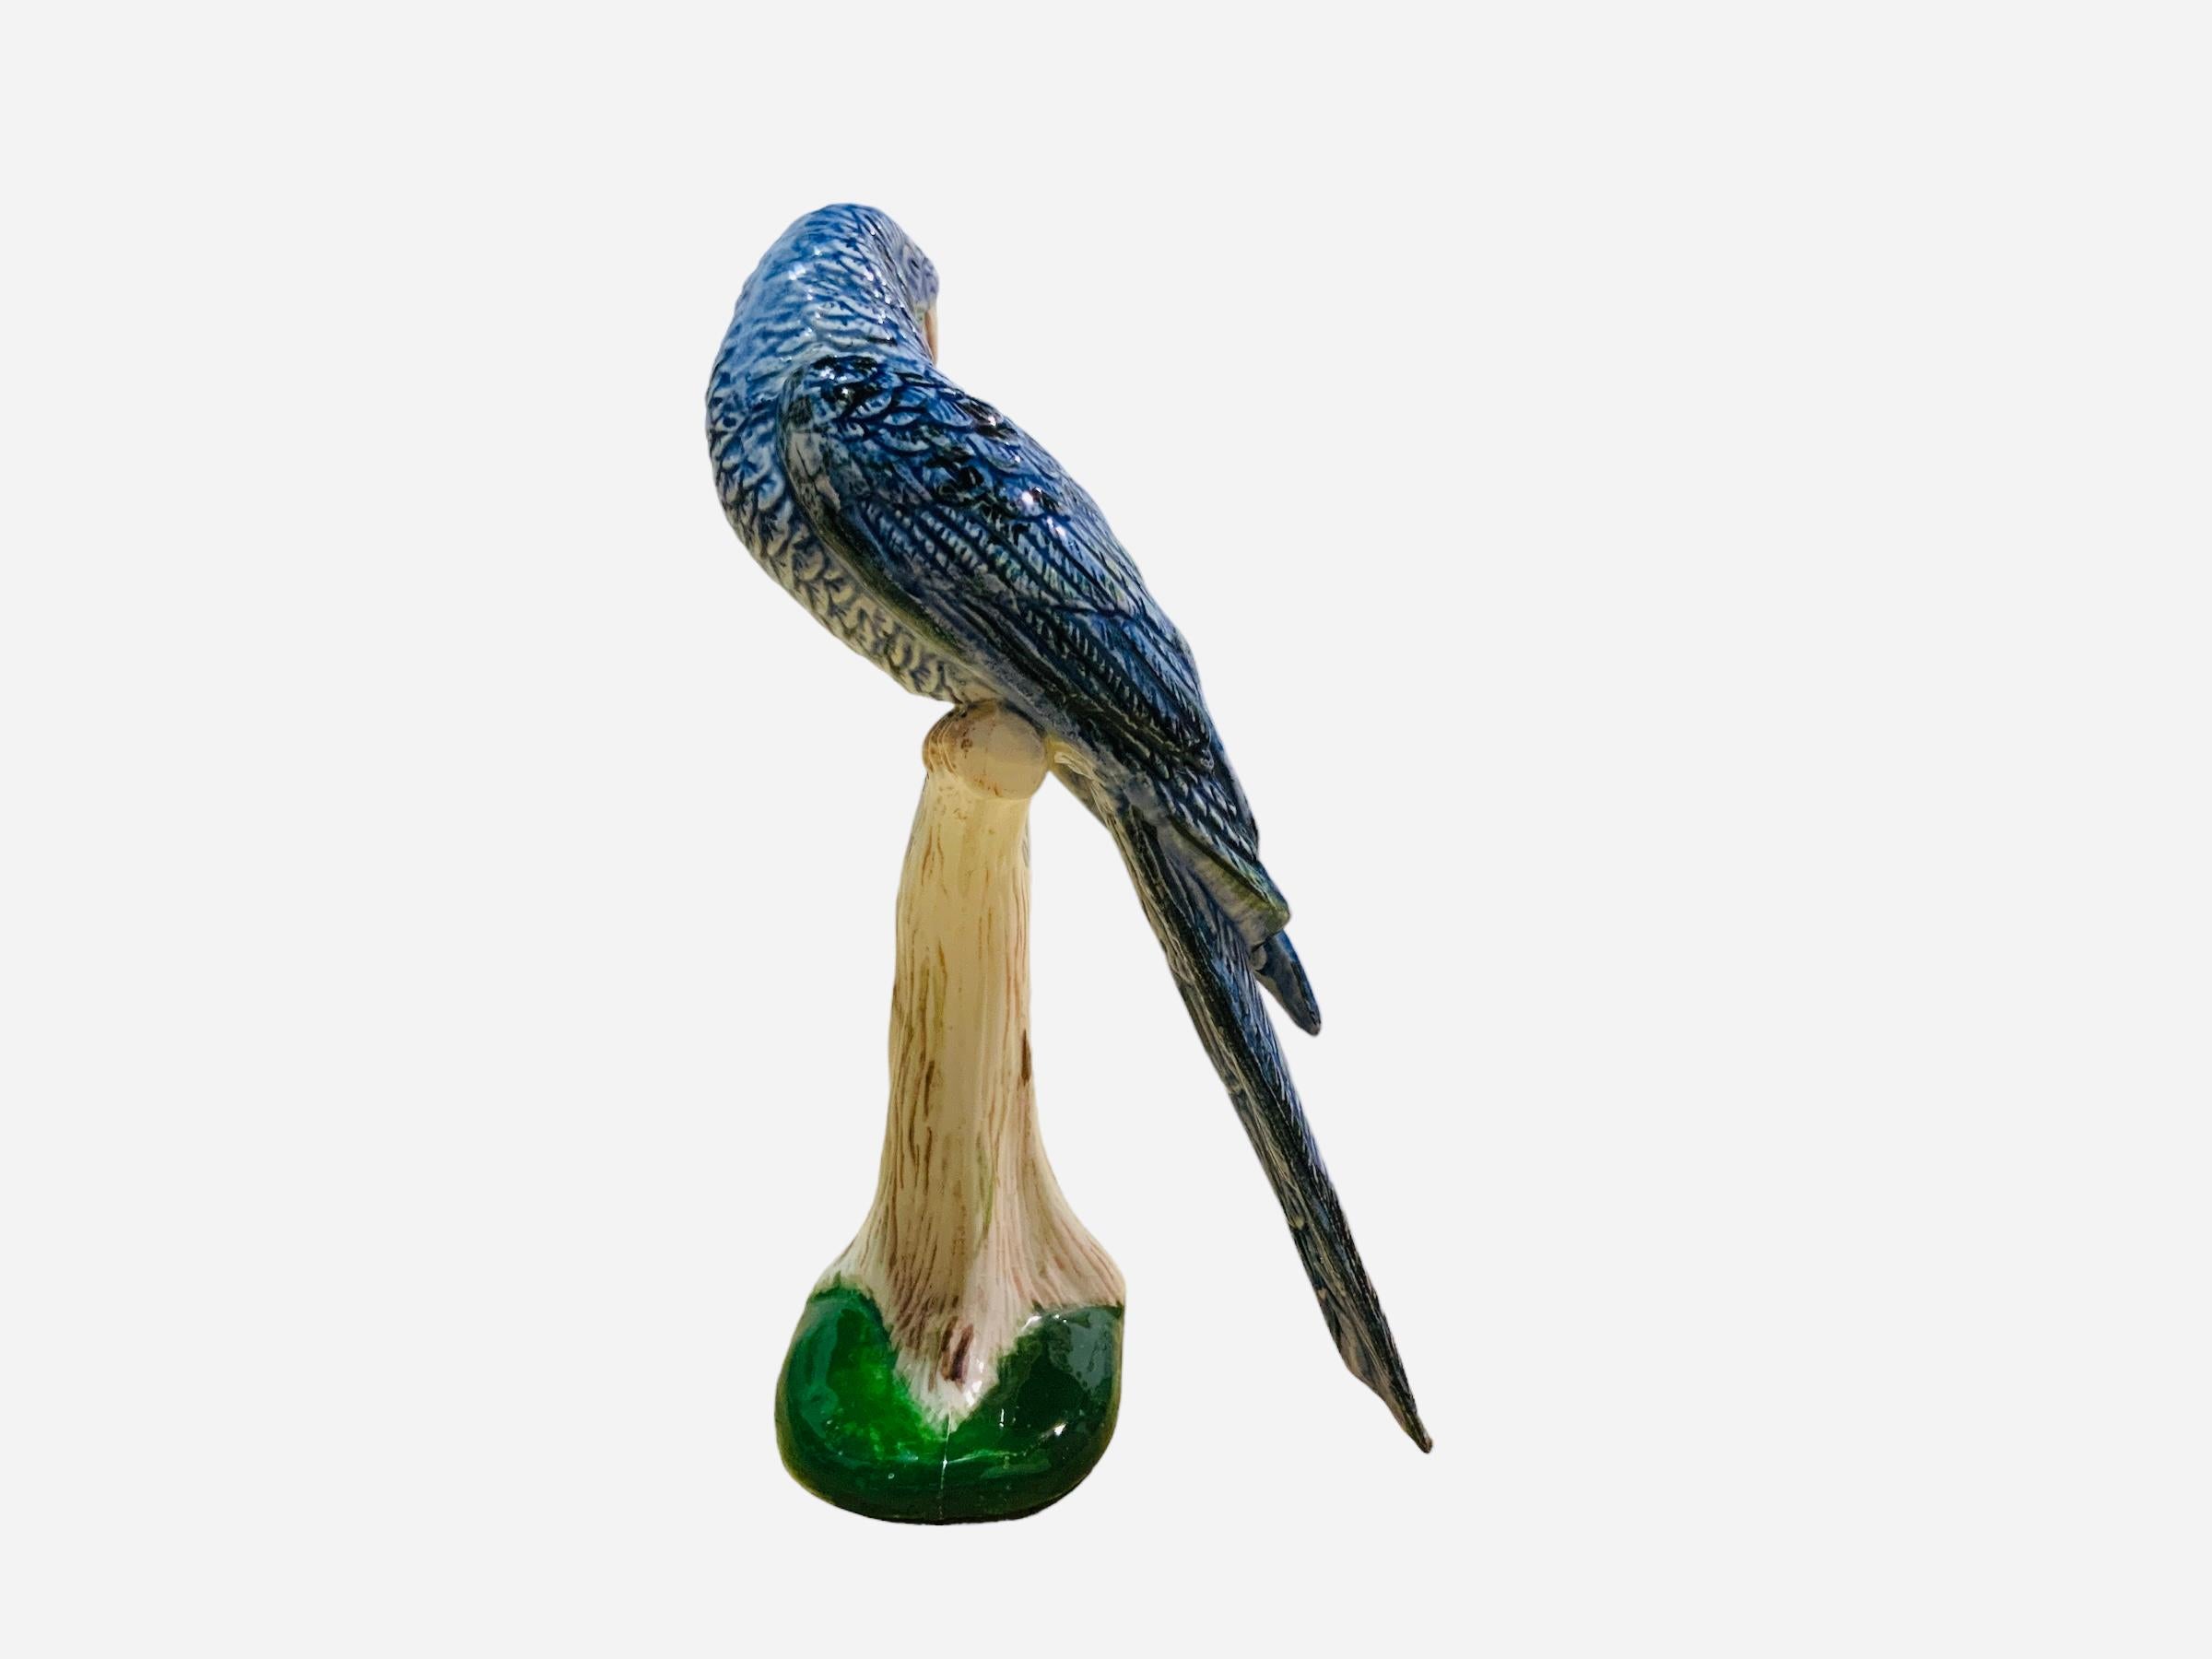 This is an unmarked porcelain figurine of a bird. It depicts a very well done hand painted blue parrot . It is standing up in a branch of a trunk supported by a green oval base.